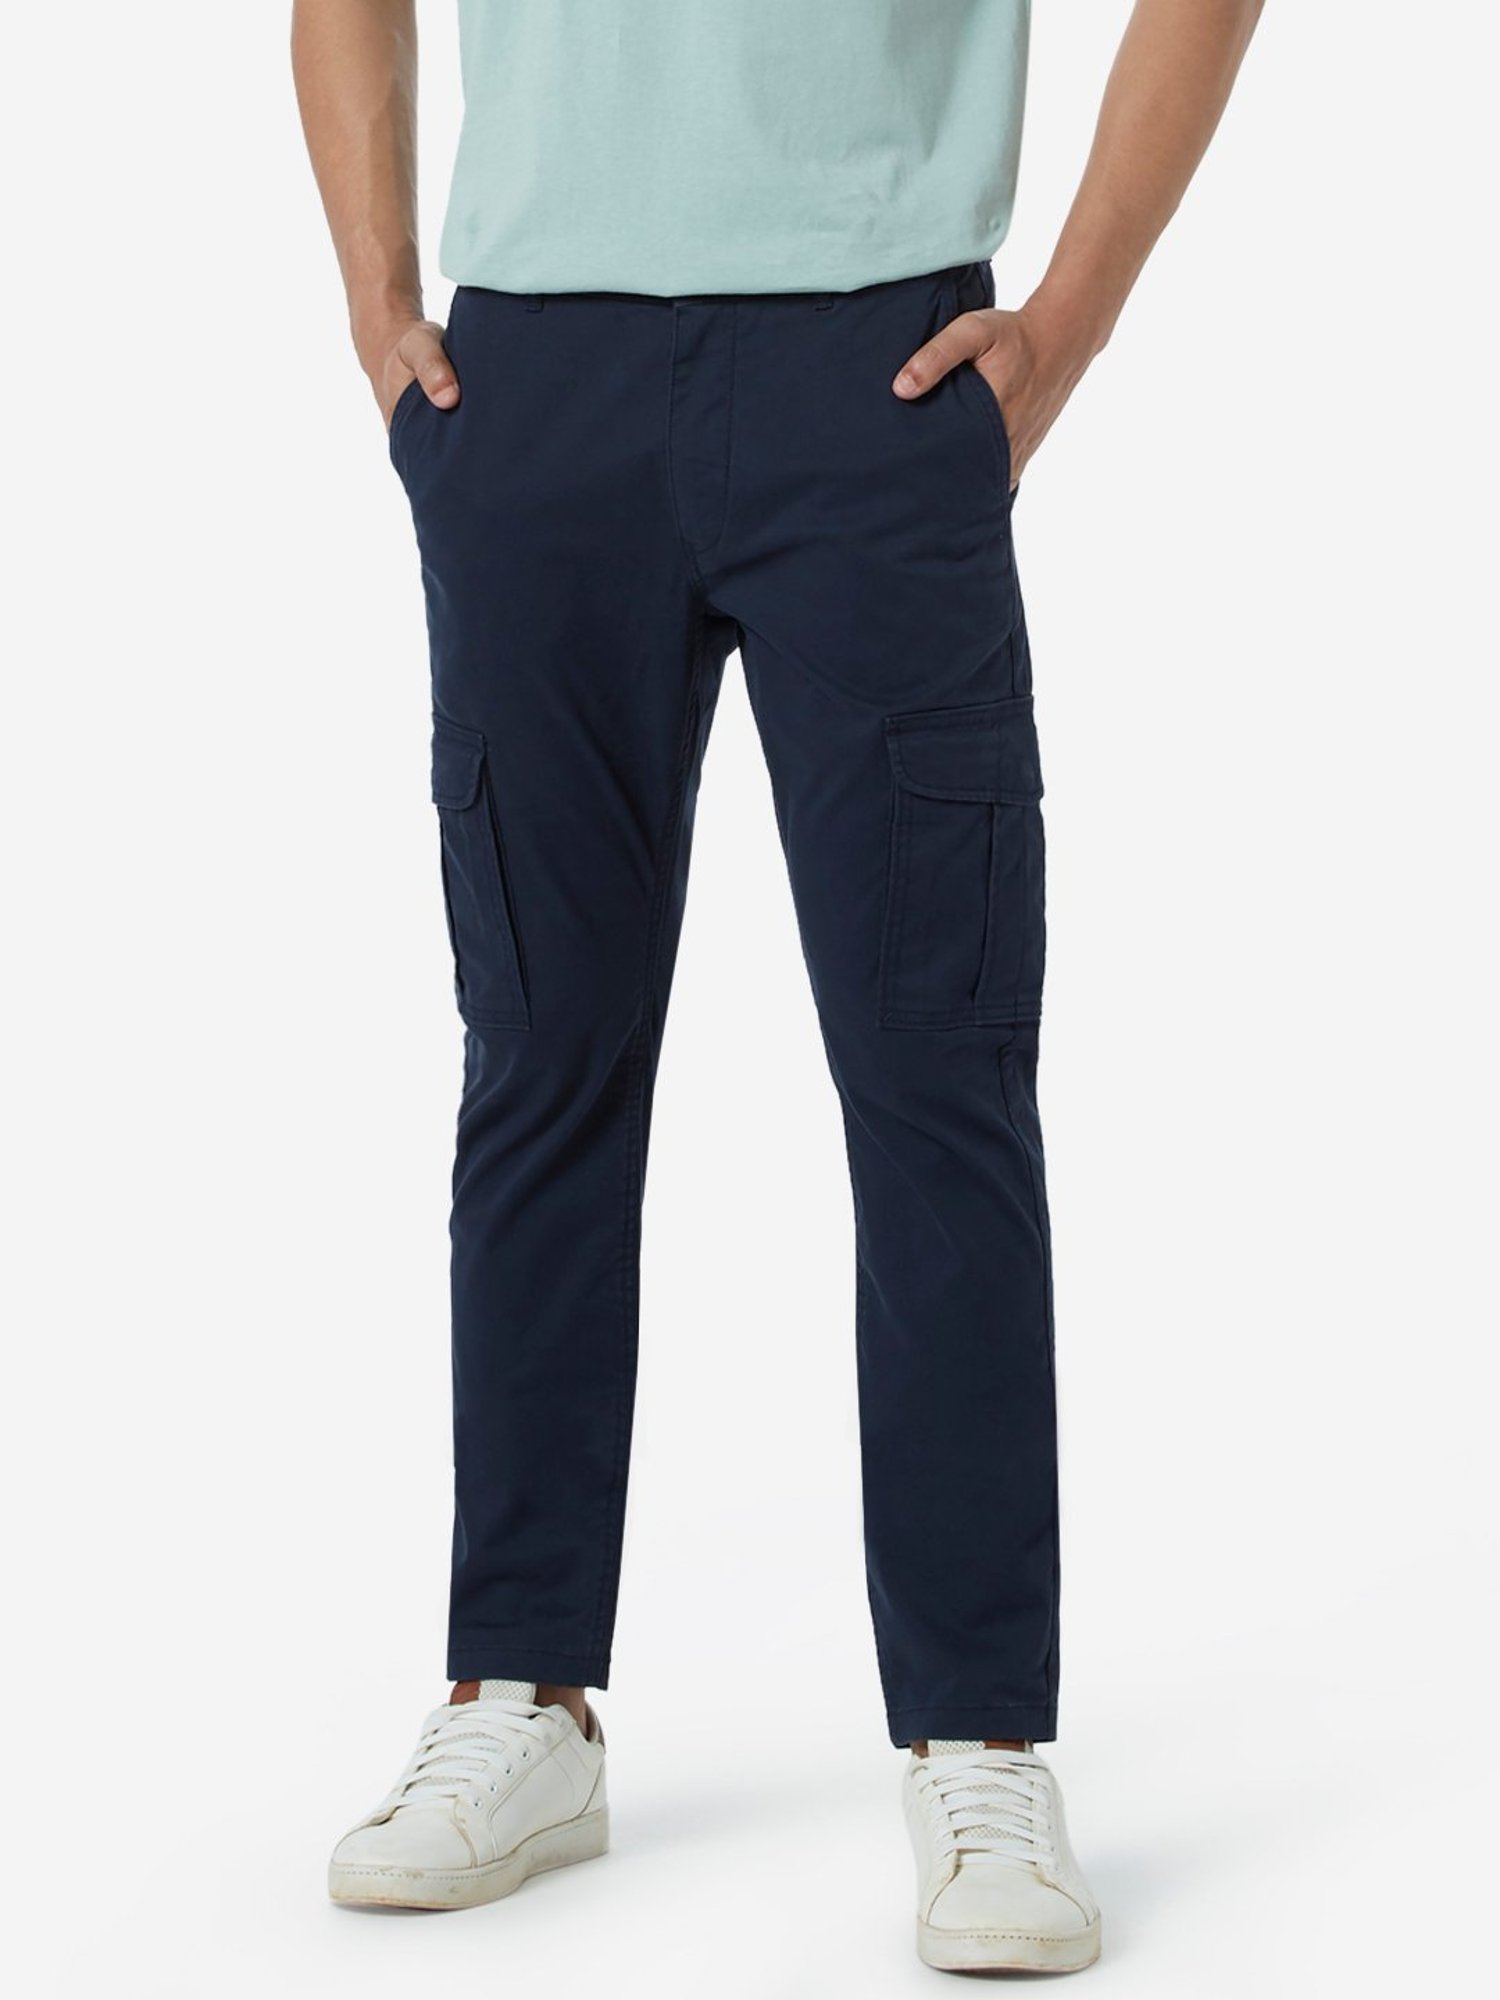 Buy BLEND Navy Solid Slim Fit Cargo Trousers  Trousers for Men 1721242   Myntra